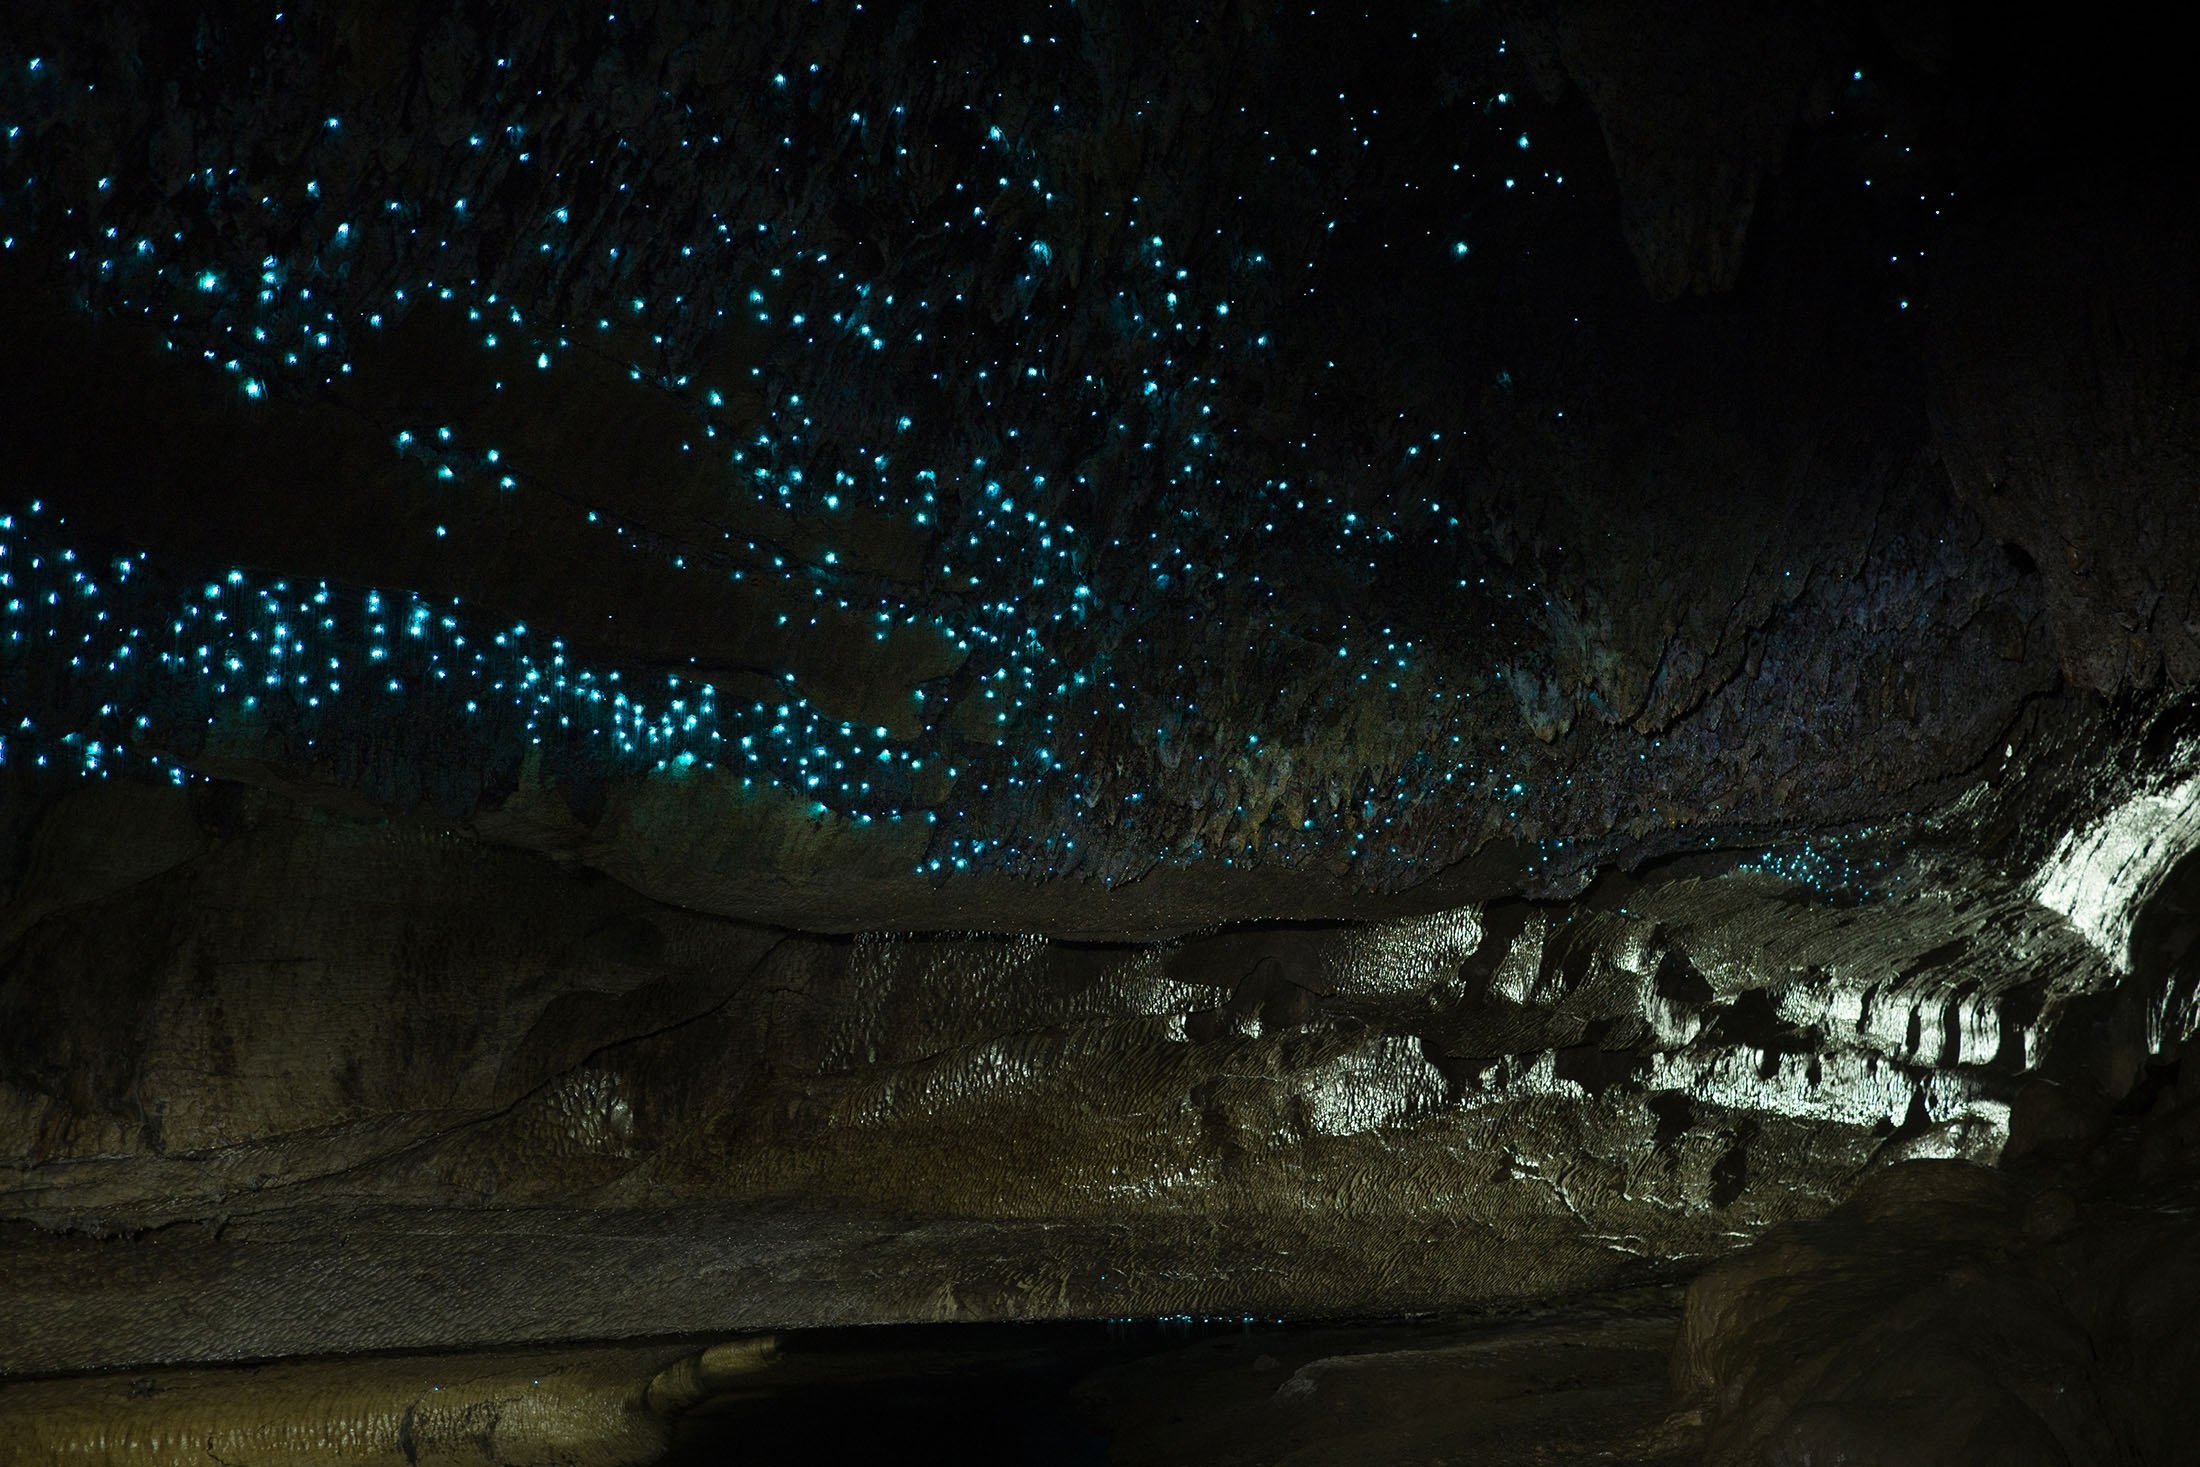 Waitomo Glowworm is a cave located in New Zealand, known for its population of Arachnocampa luminosa, a species of glowworm found exclusively in the country.  (Photo Shutterstock)